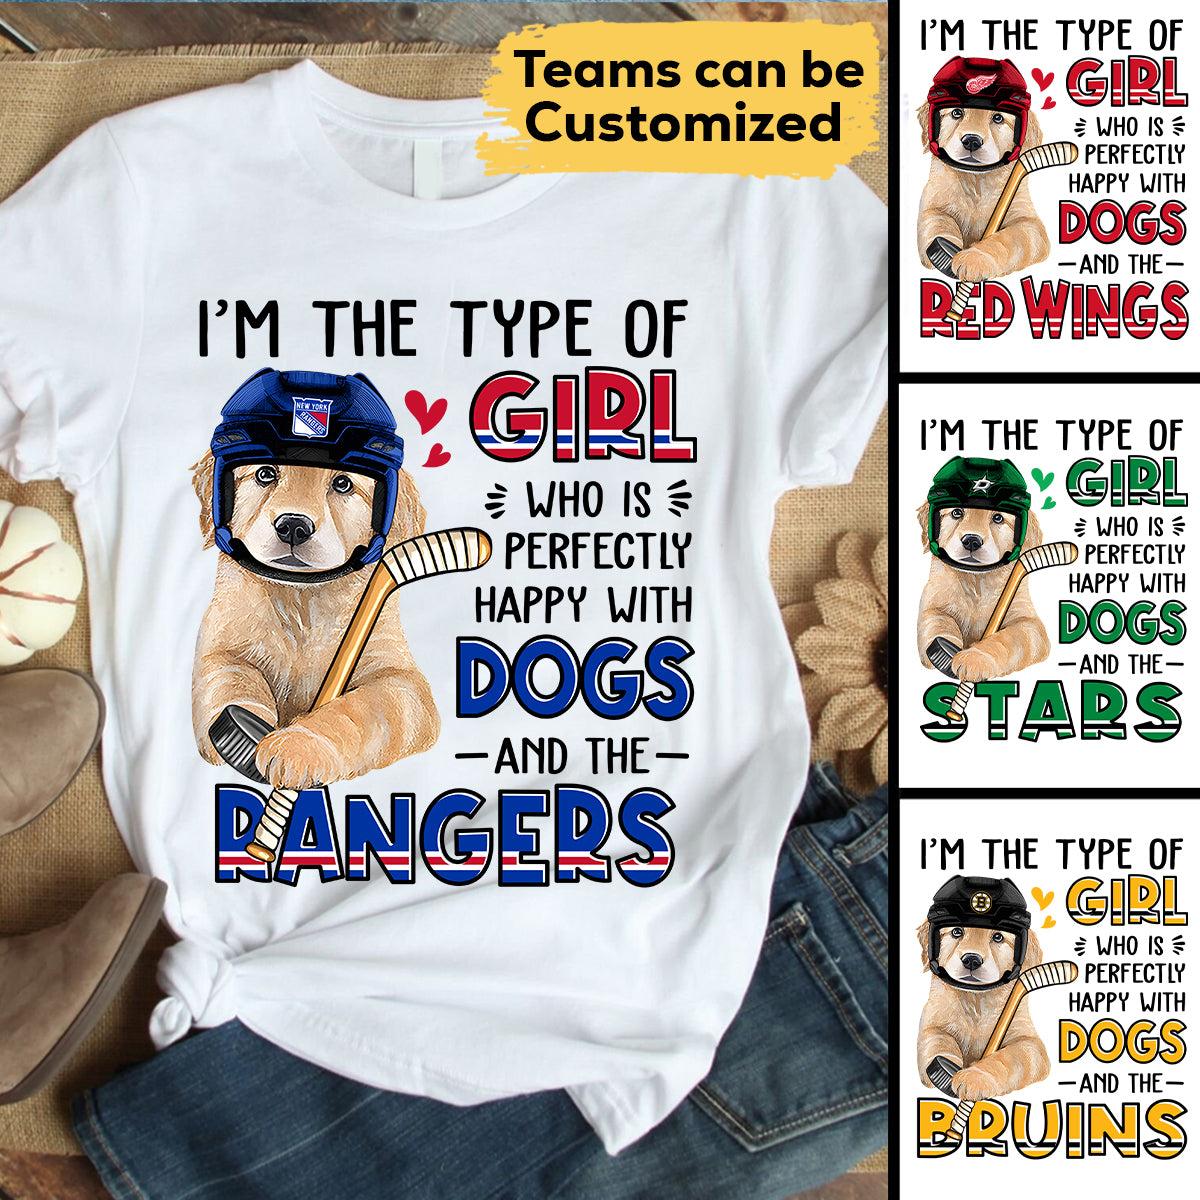 Just A Girl Loves Her Teams - Special Edition Shirt